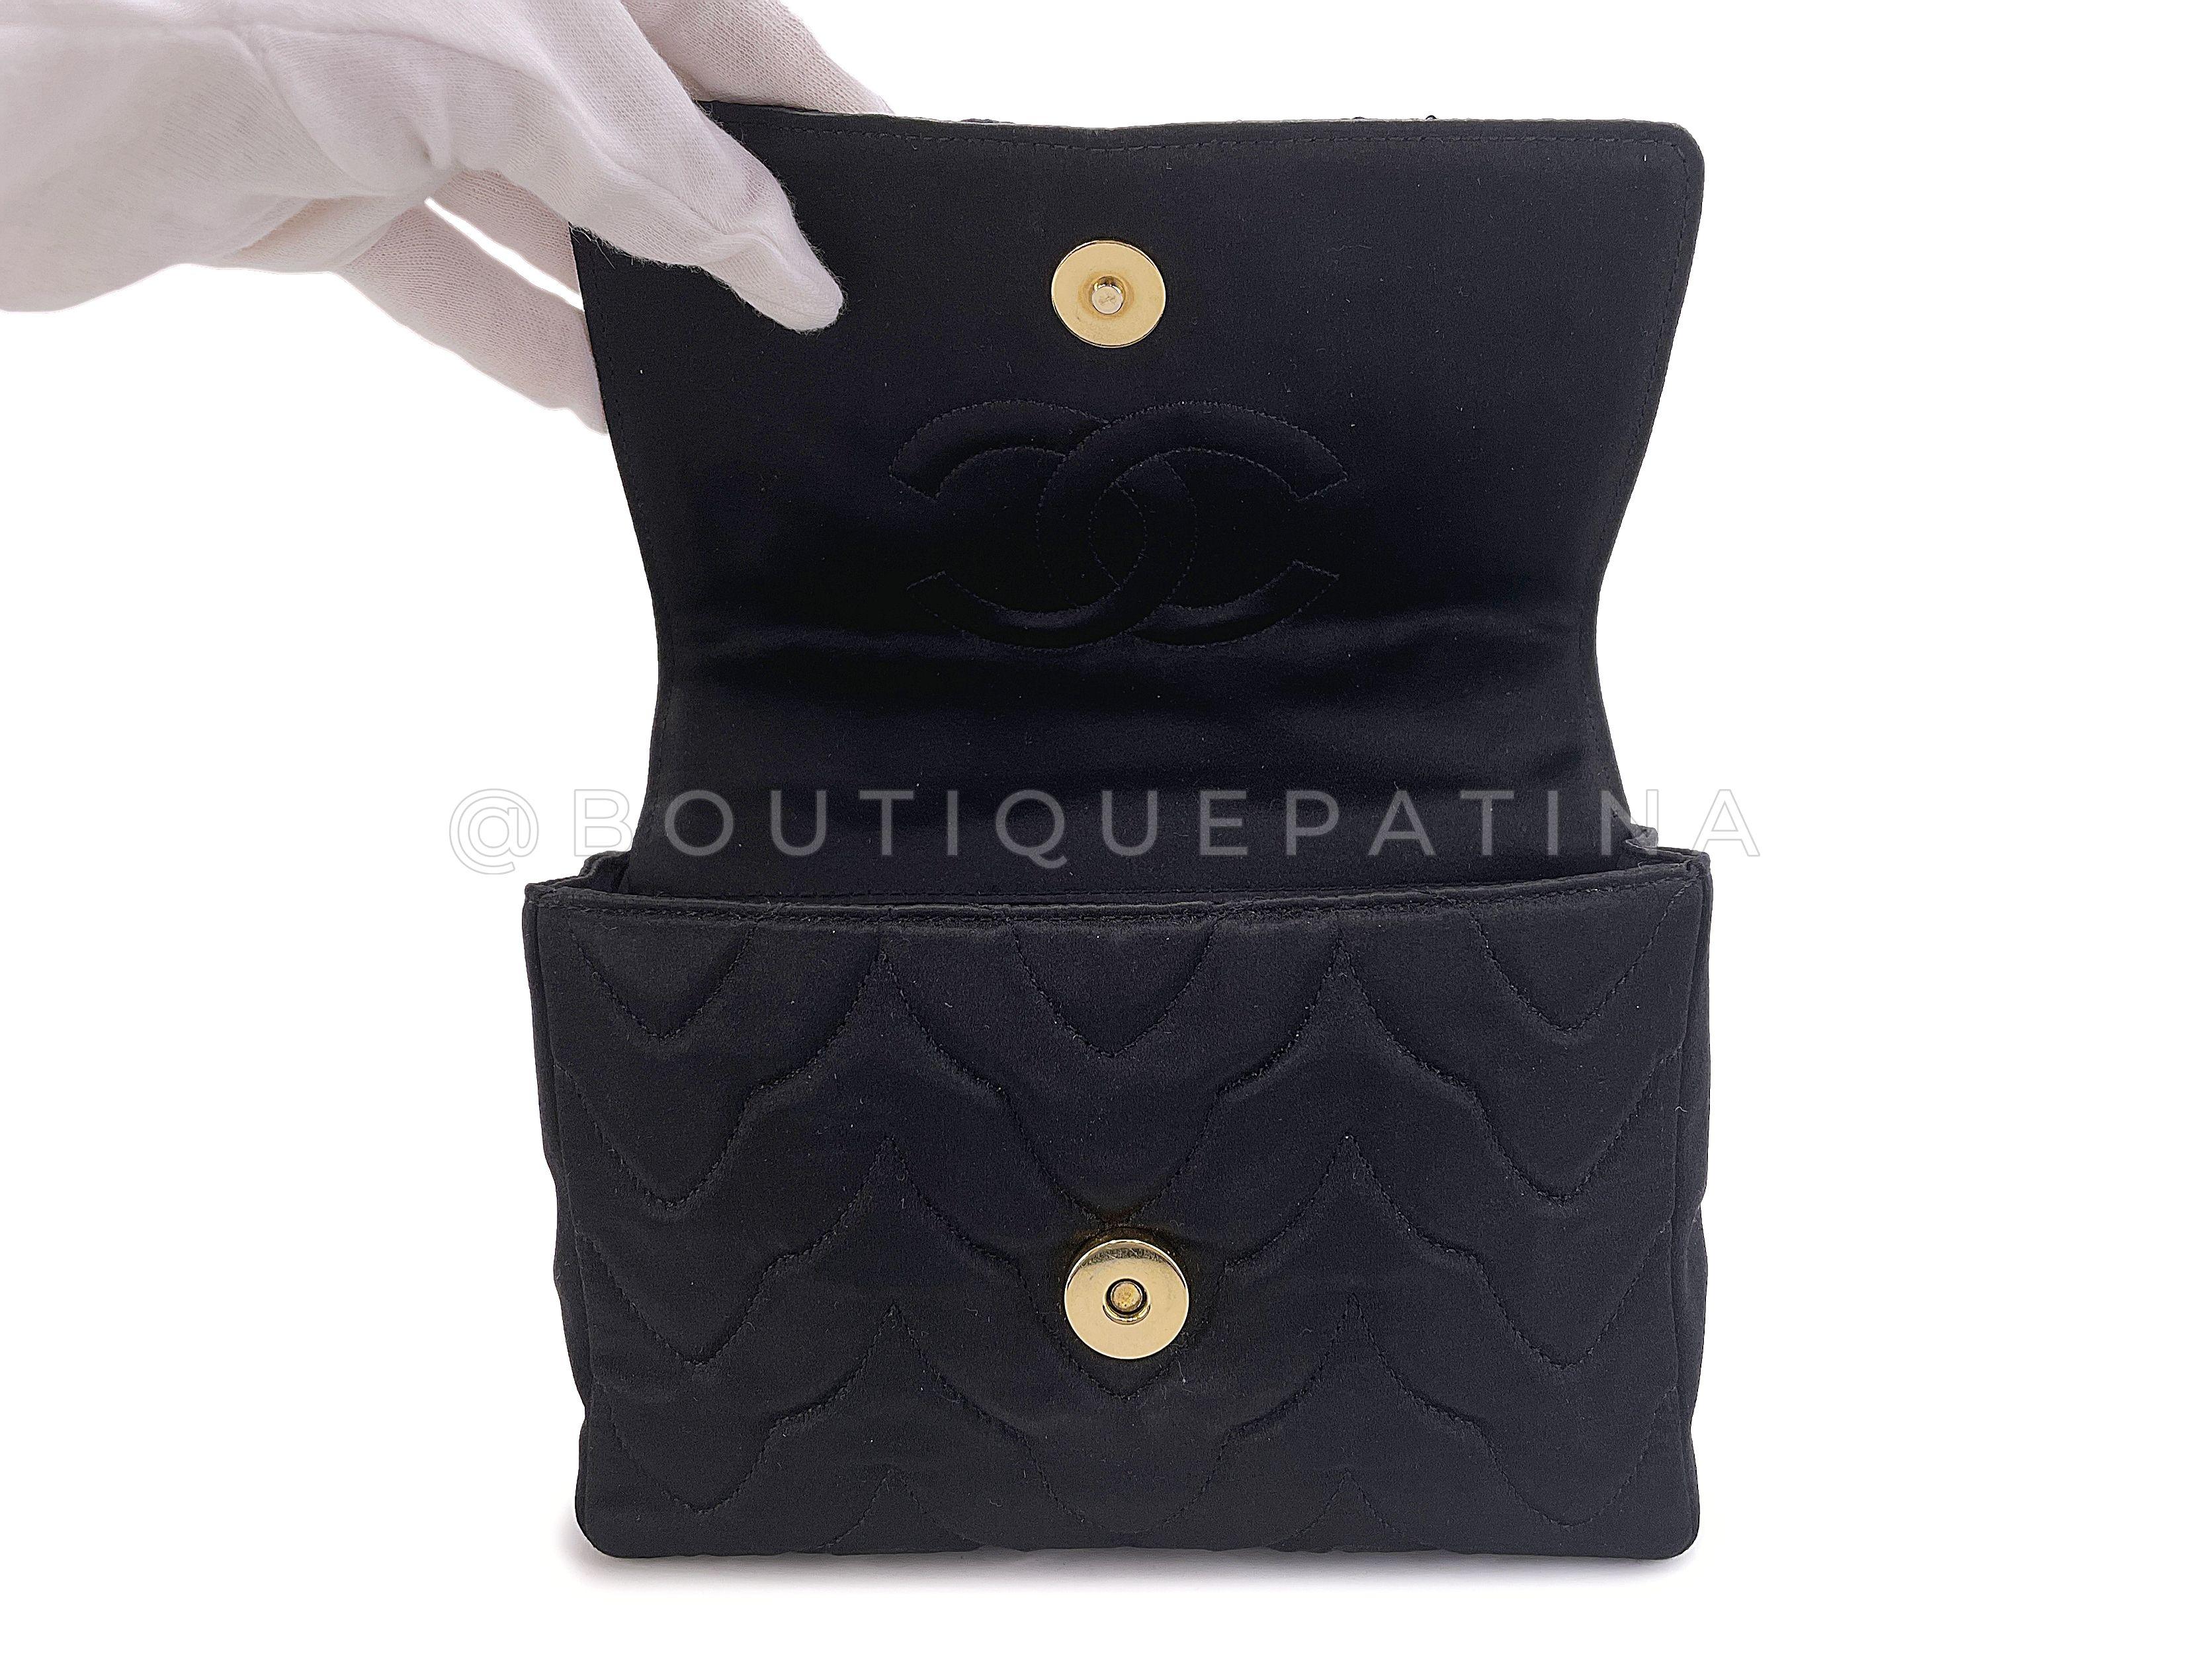 Chanel 1991 Vintage Black Quilted Satin Jeweled Gripoix Flap Bag GHW 67830 For Sale 5